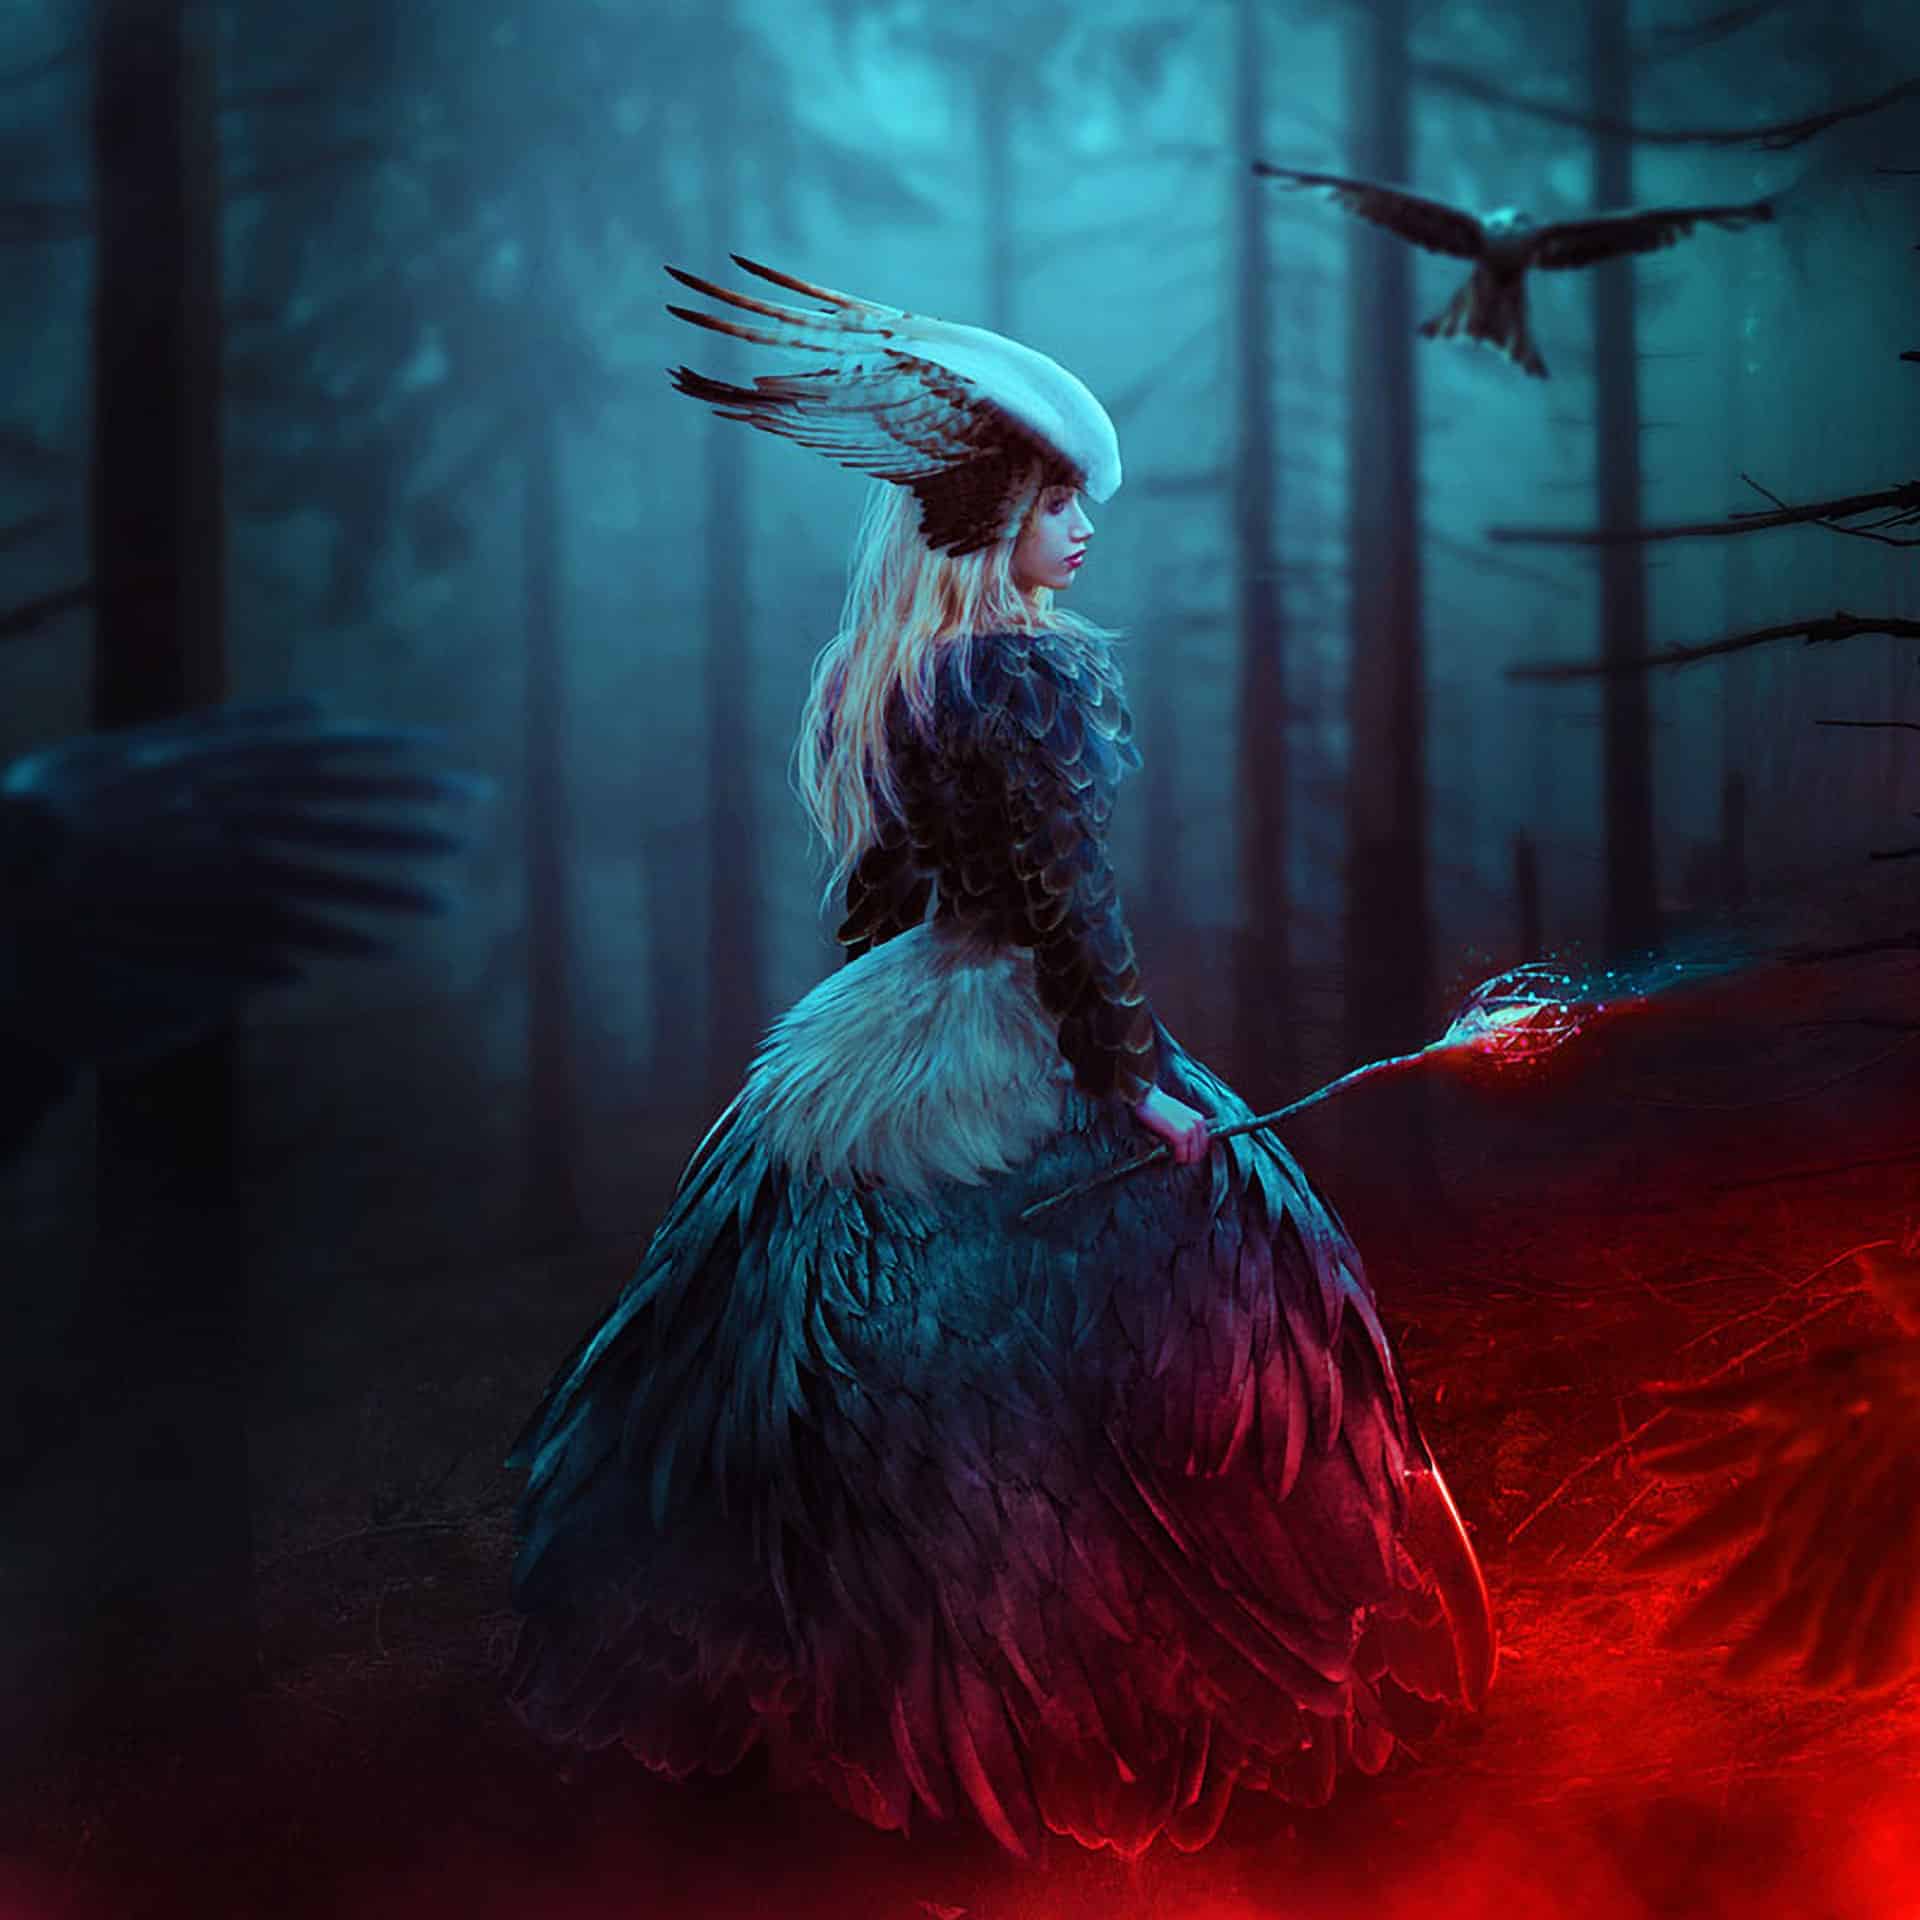 How to Create a Queen of Bird Photo Manipulation in Photoshop